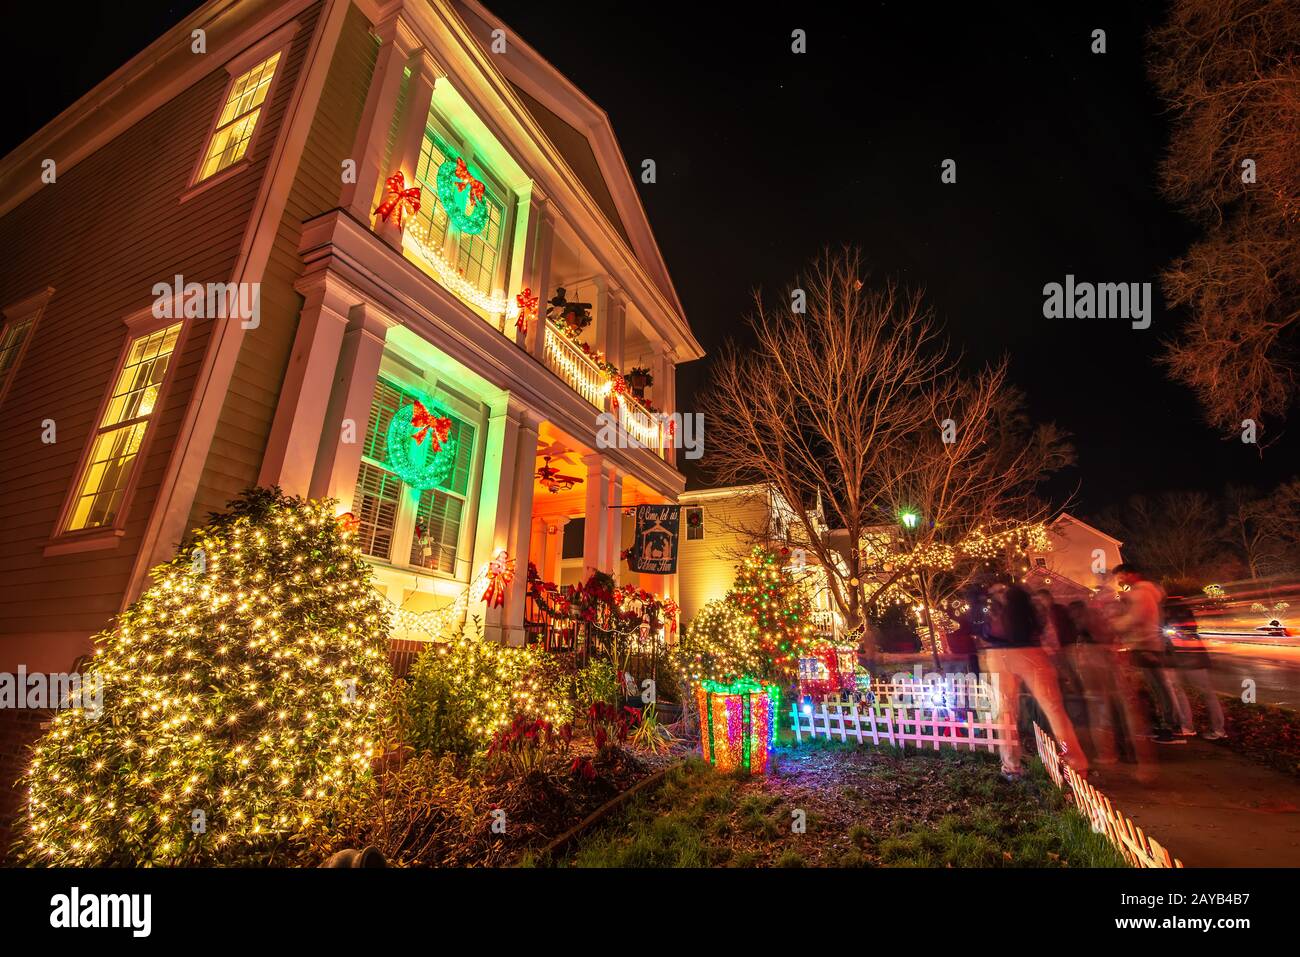 Outdoor christmas decorations at christmas town usa Stock Photo ...